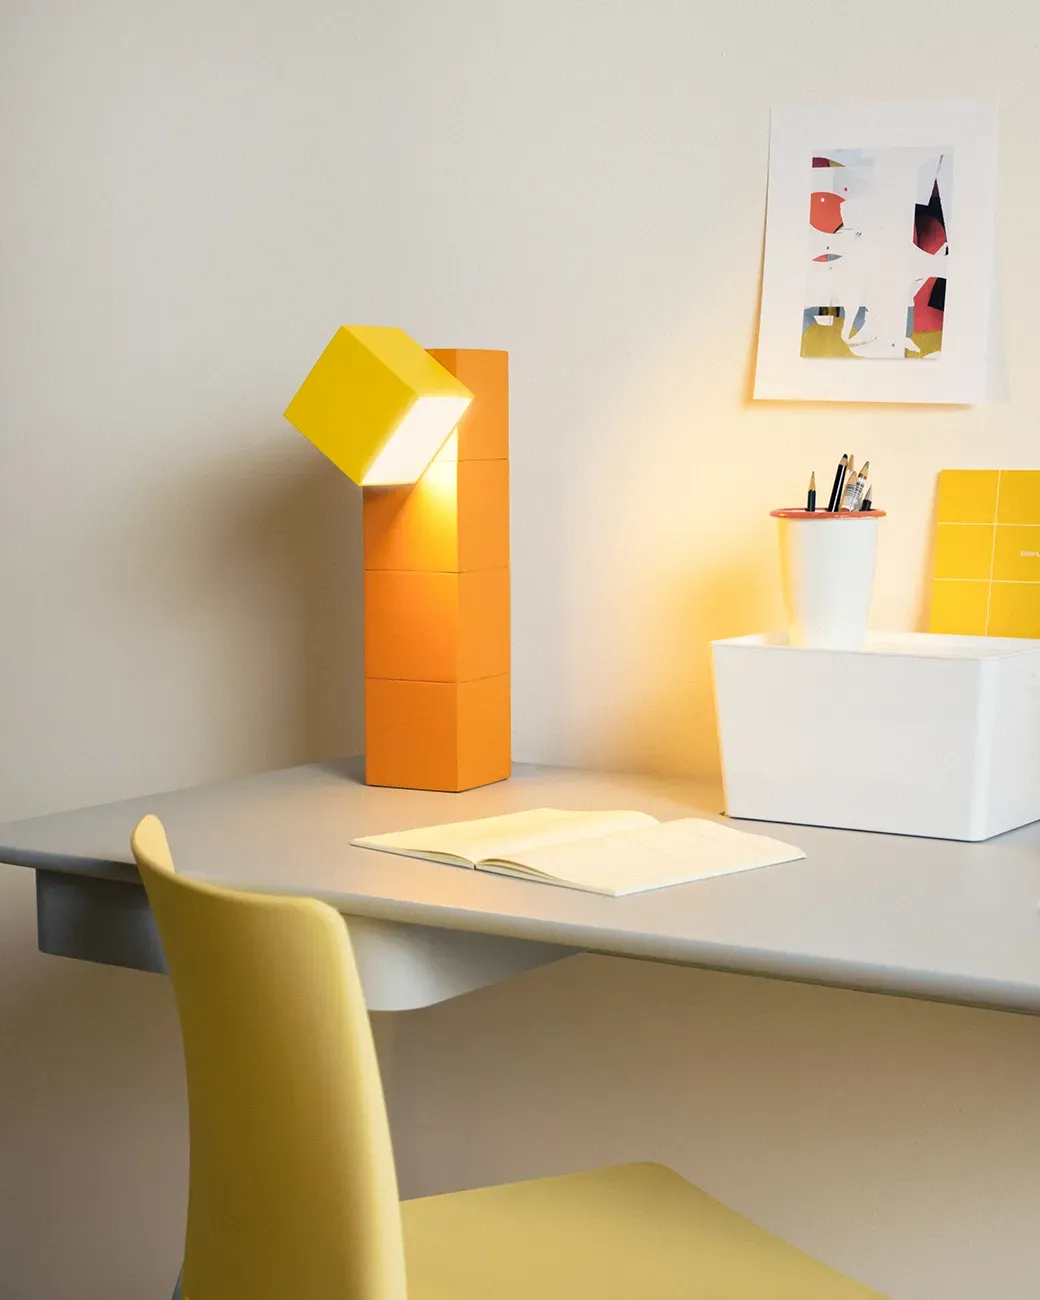 Gantri’s Analog Task Light table lamp is placed on a home office table along with an open blank  journal and a pen holder filled with pencils